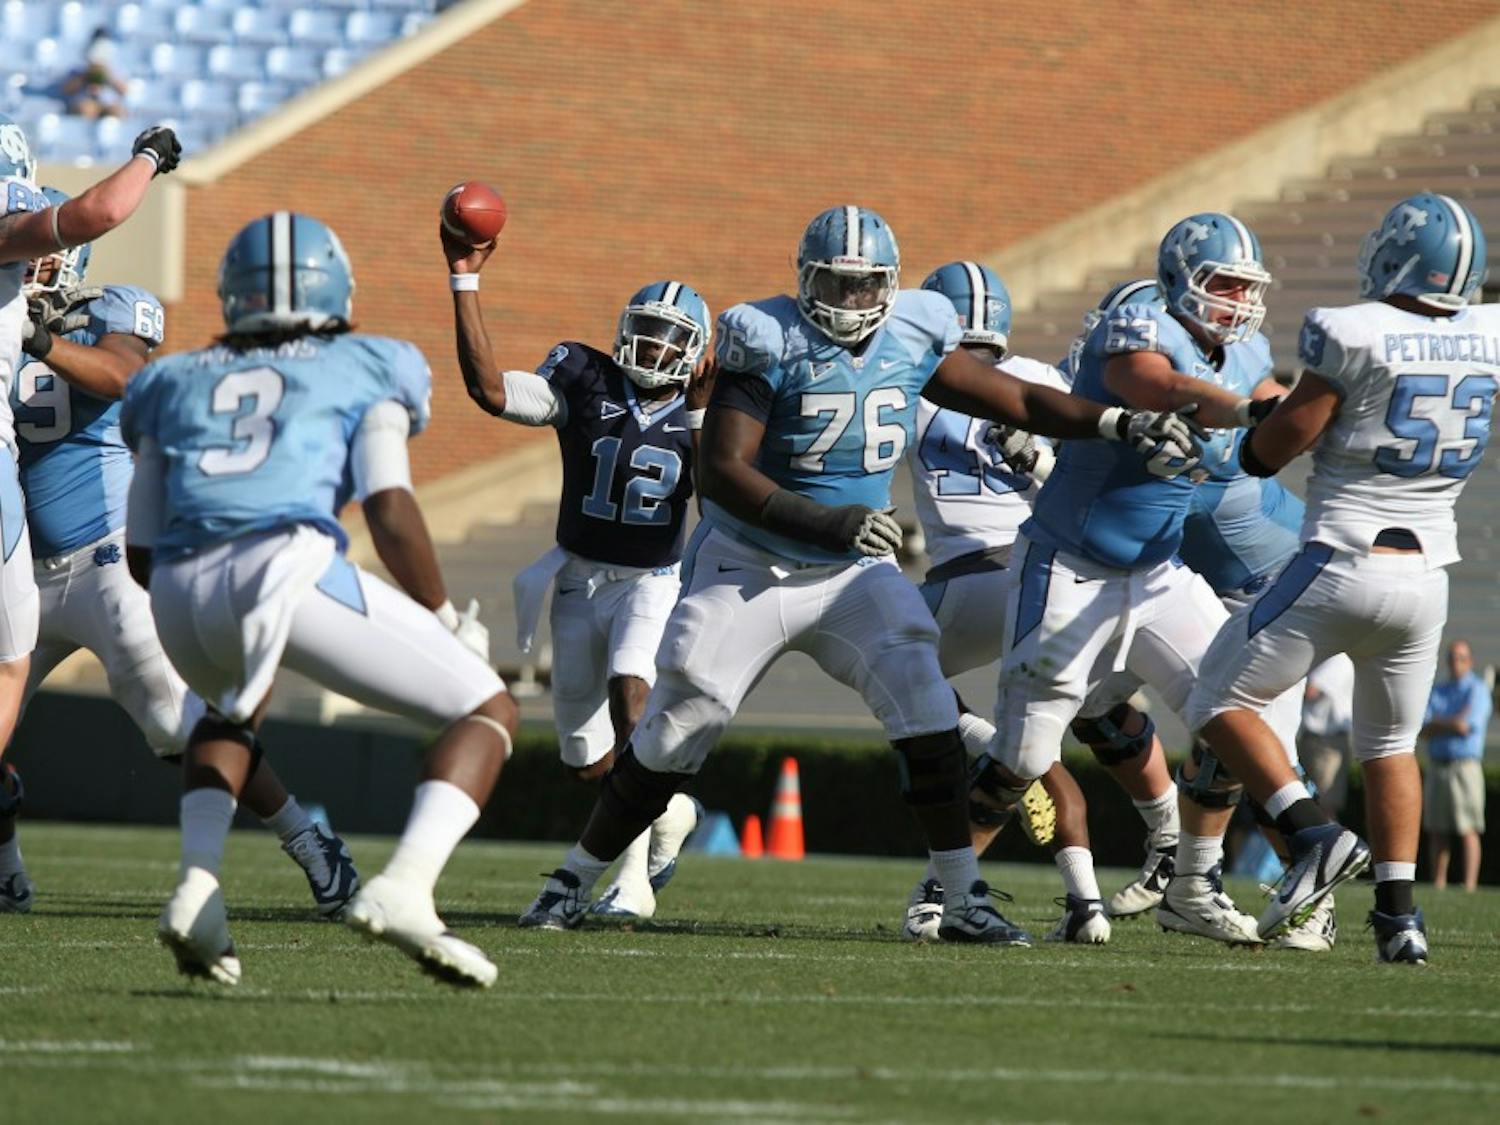 	April 14, 2012

	UNC hosted its annual spring football game Saturday at Kenan Stadium. The team played scrimmages and ran some of their new plays under new coach Larry Fedora.